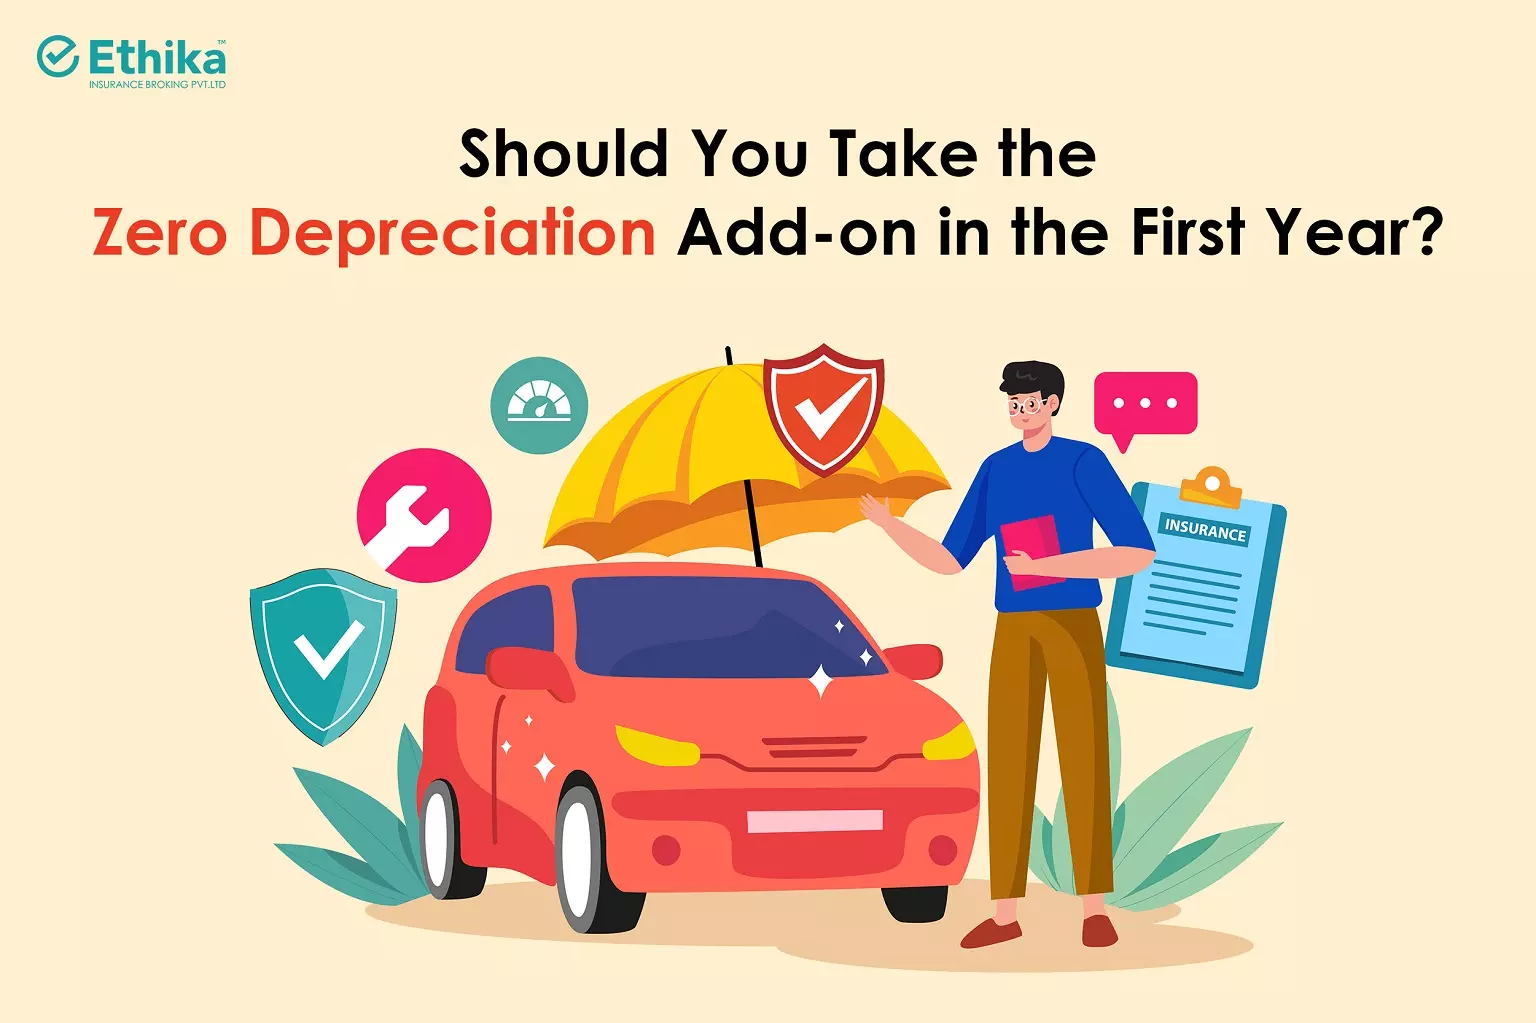 Take the Zero Depreciation Add-on in the First Year